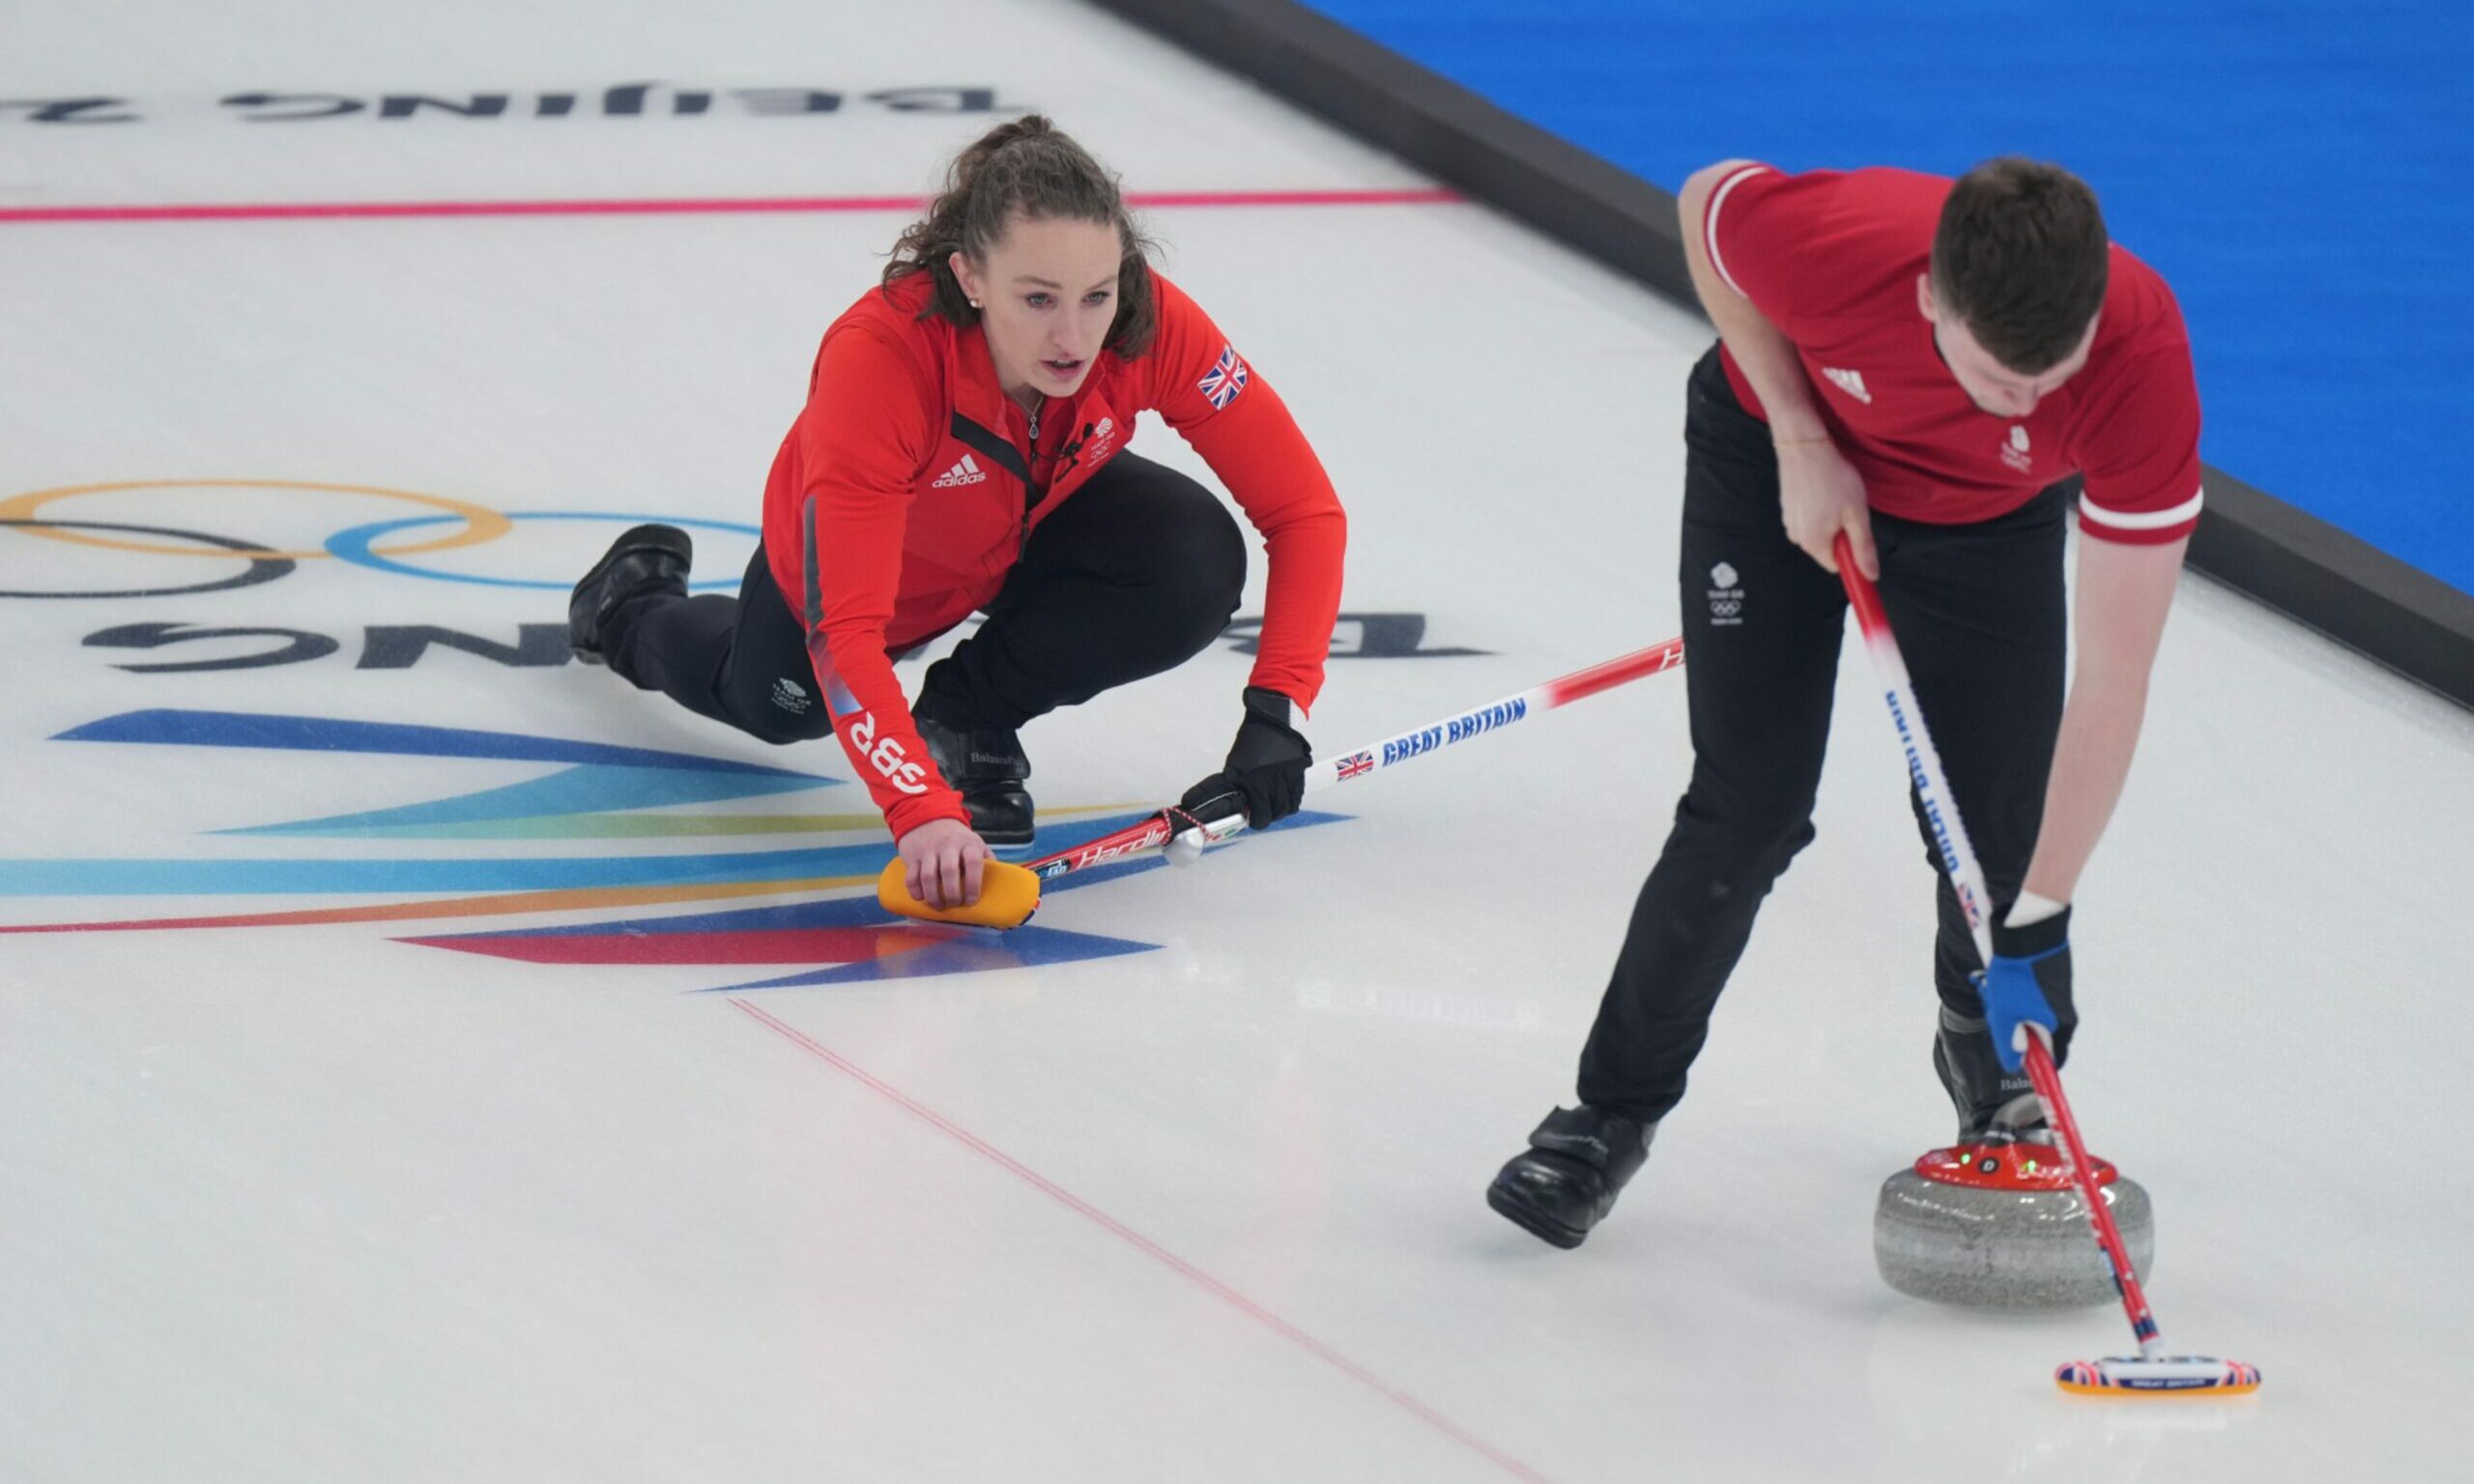 Jennifer Dodds (L) and Bruce Mouat of Britain compete against Canada during the curling mixed doubles round robin session of the Beijing 2022 Winter Olympics.